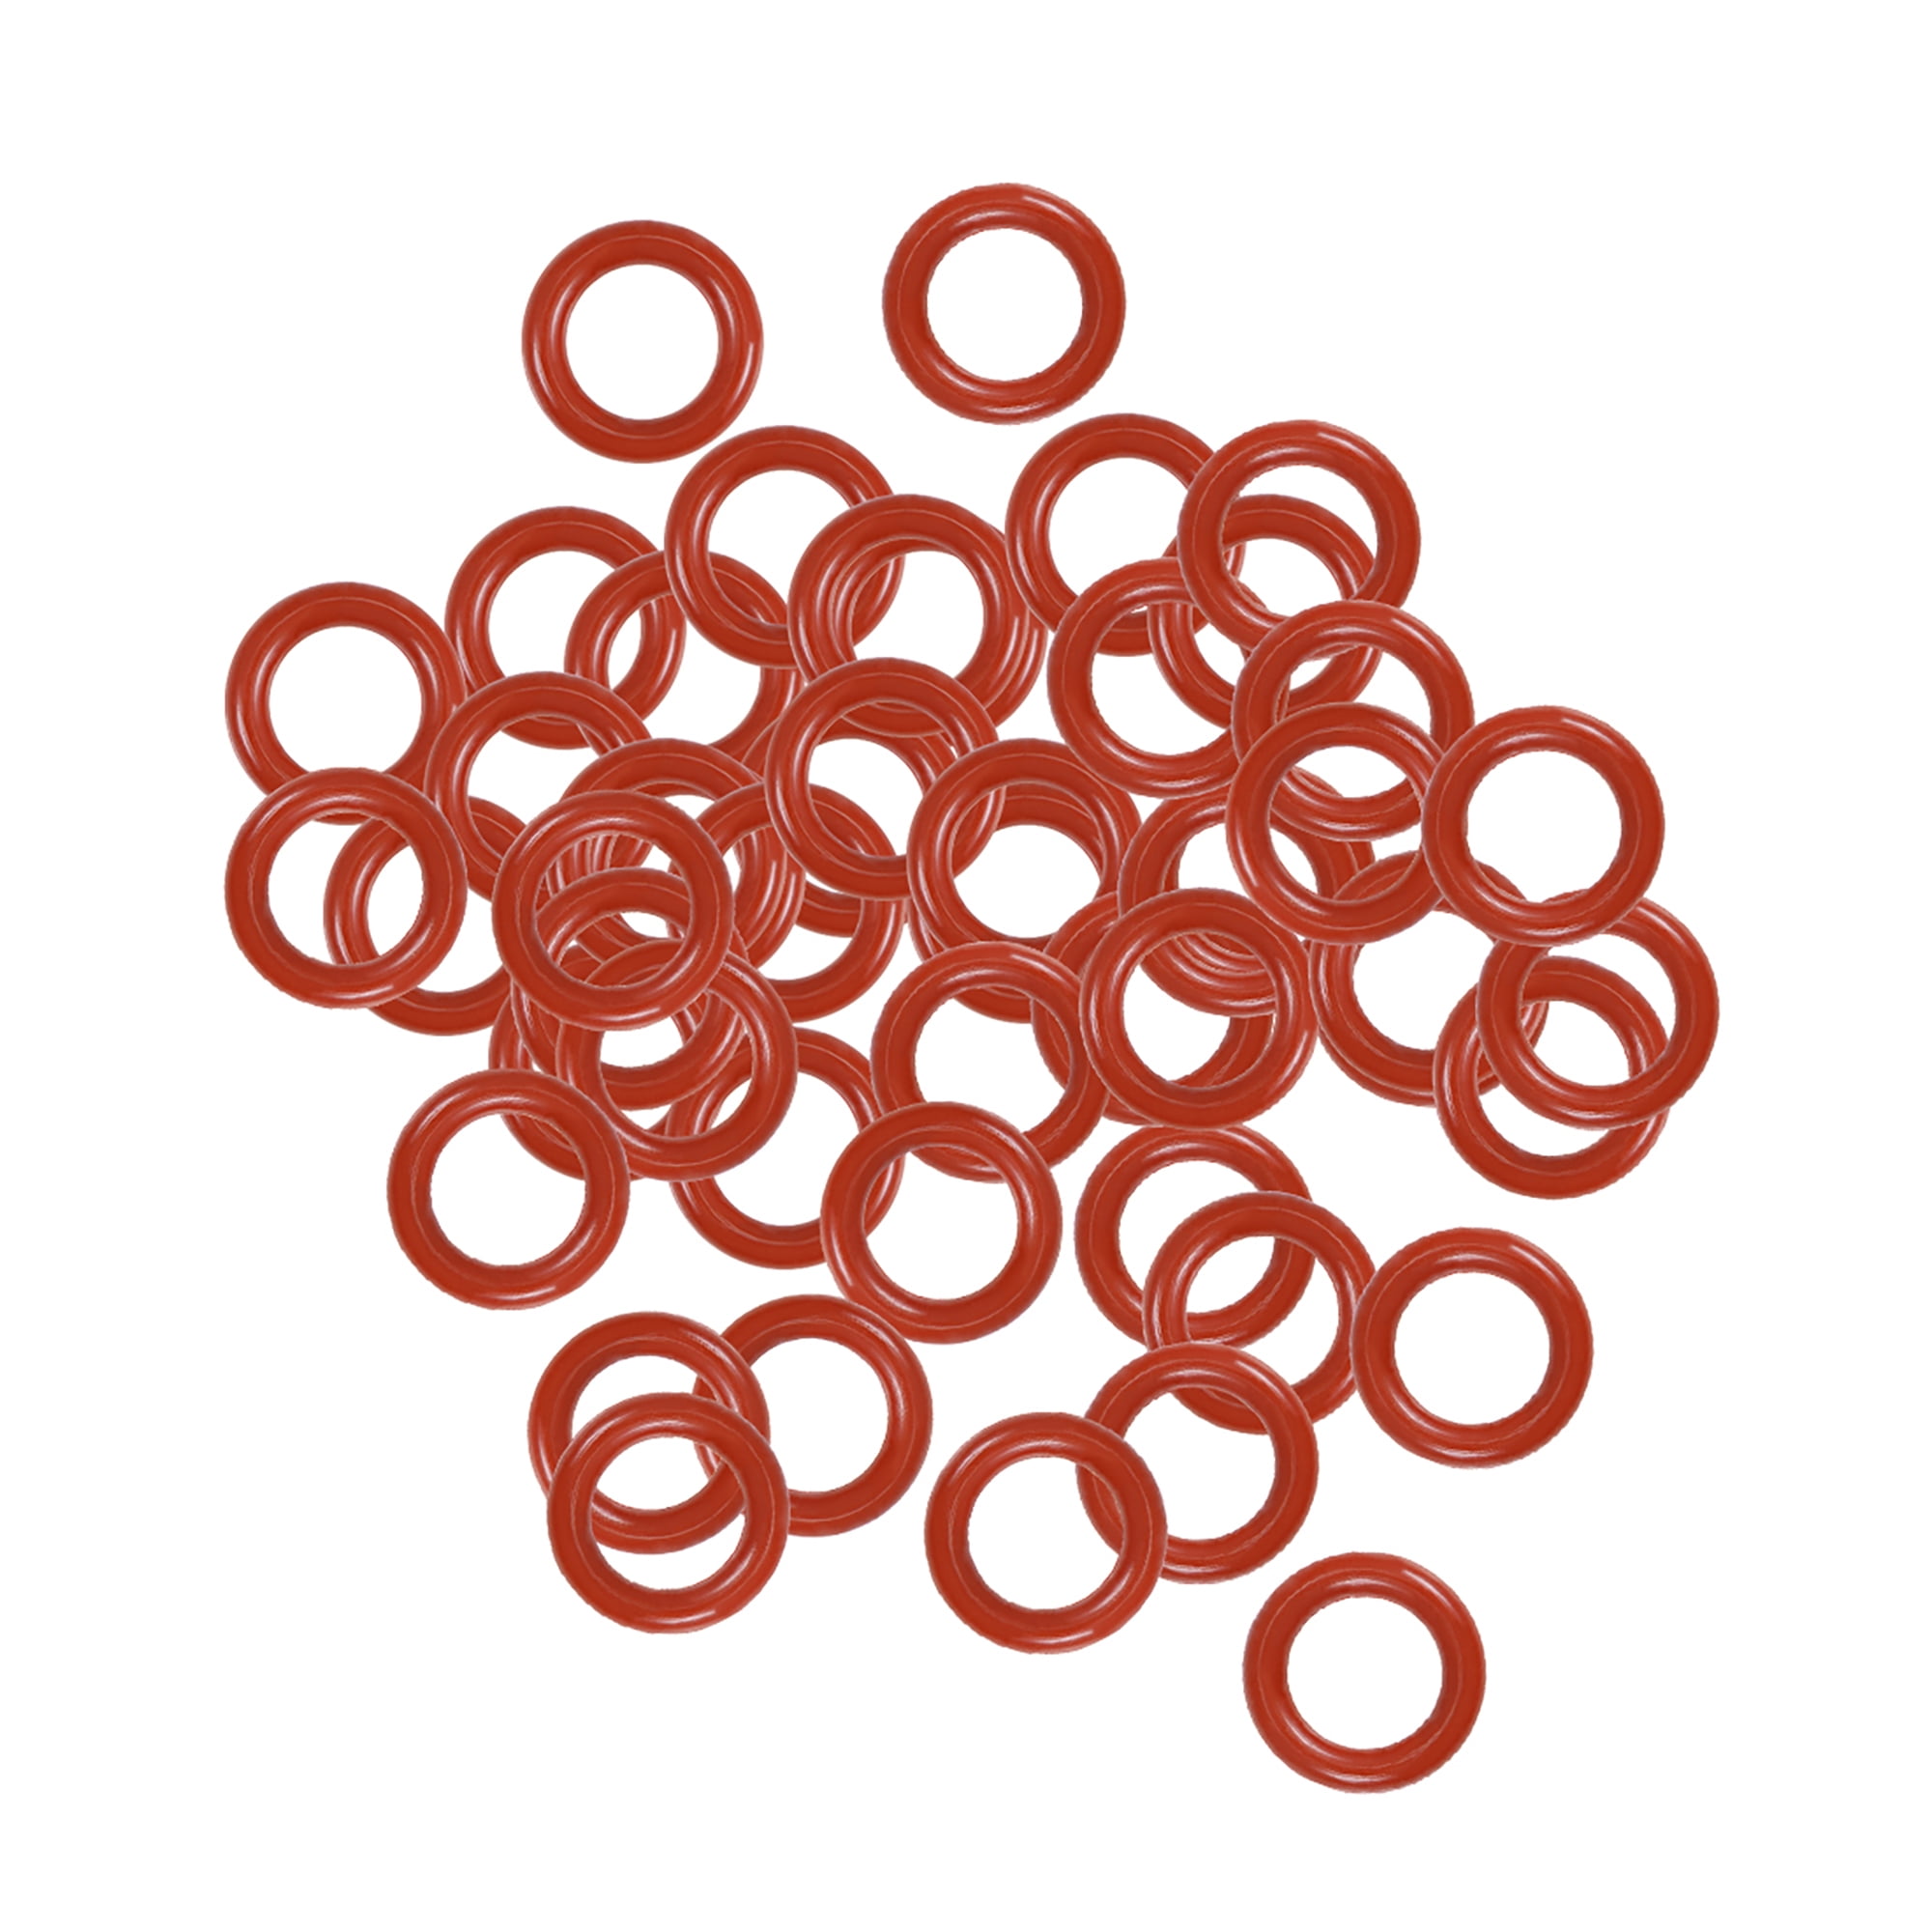 Uxcell O-Rings Nitrile Rubber 5mm x 7mm x 1mm Seal Rings Sealing Gasket 50pcs